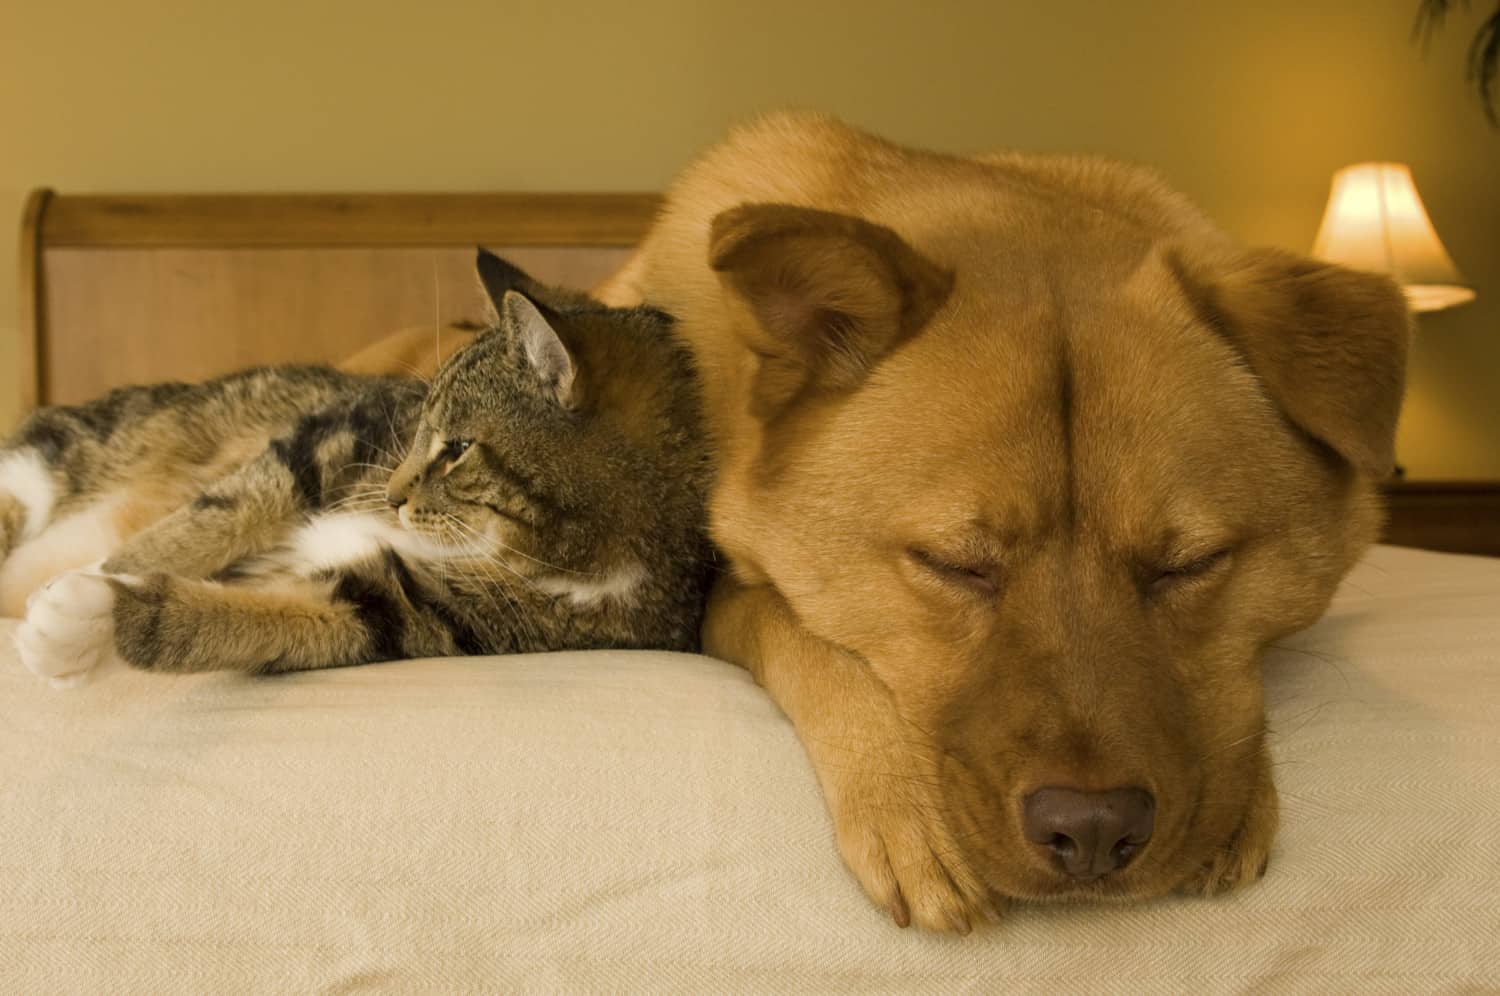 Pet-Friendly Hotels - Book Top Dog & Cat-Friendly Hotels with Hilton